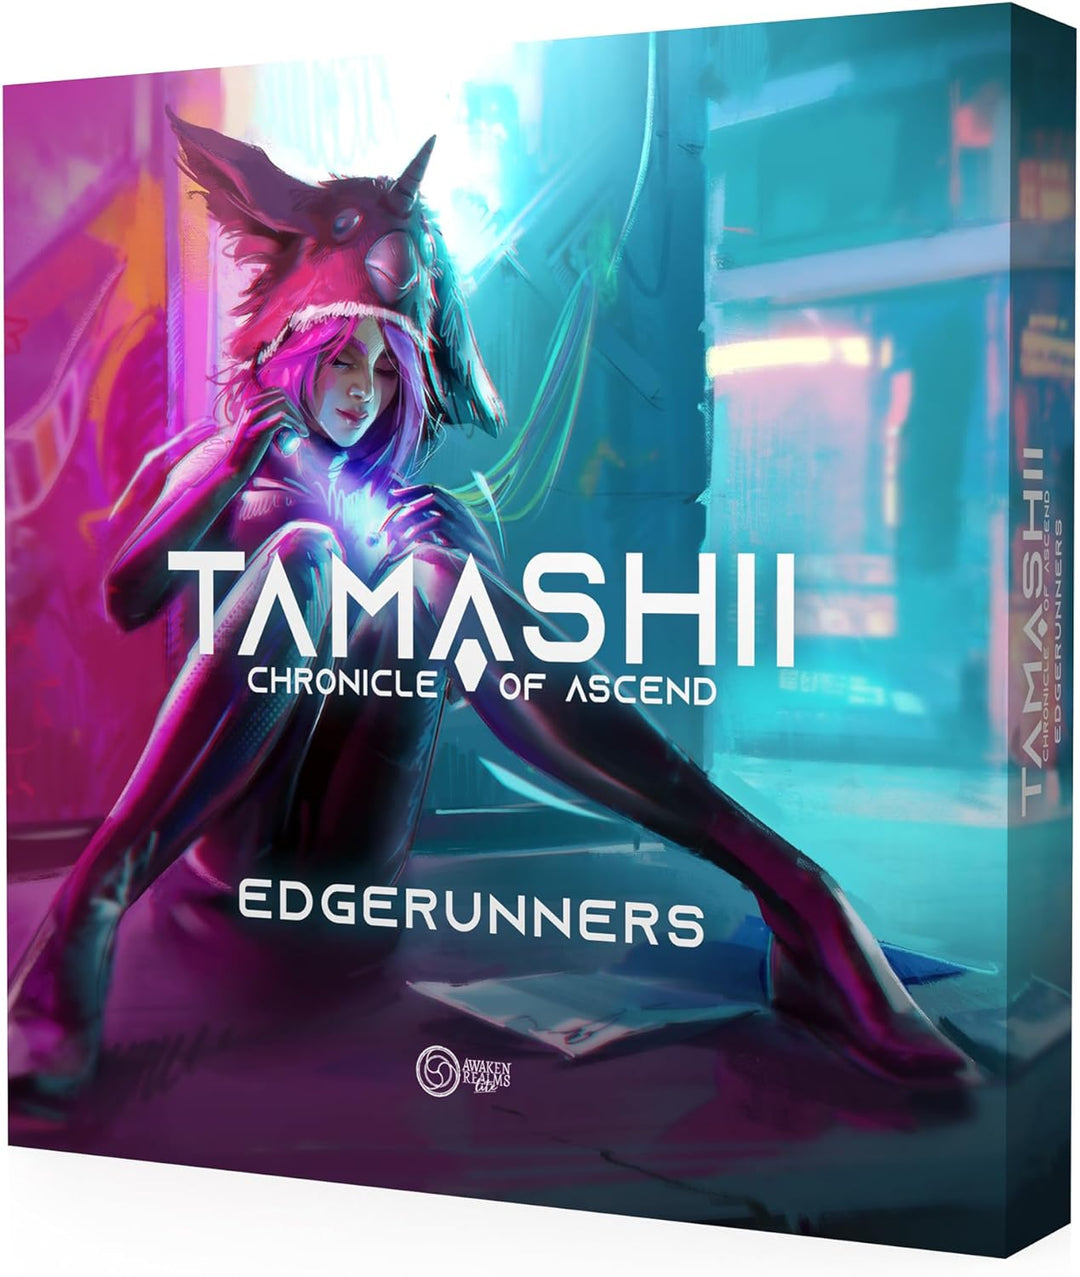 Tamashii: Chronicle of Ascend Edgerunners Miniatures - Exquisite Fantasy Figures for Tabletop Gaming, Sci-Fi Strategy Game